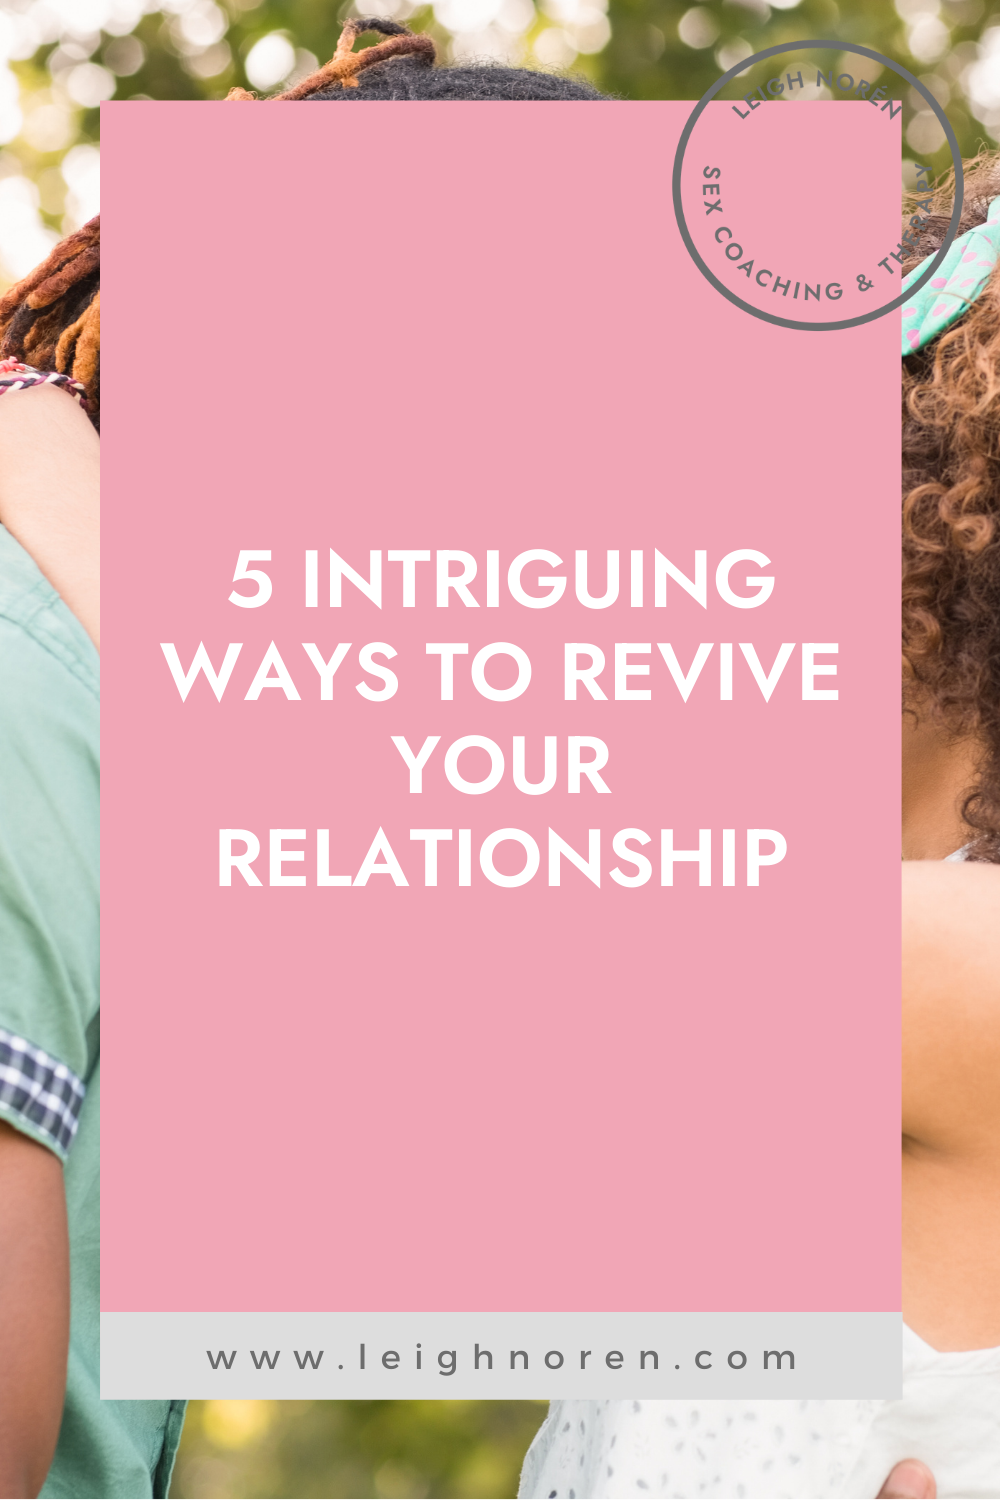 5 Intriguing Ways To Revive Your Relationship